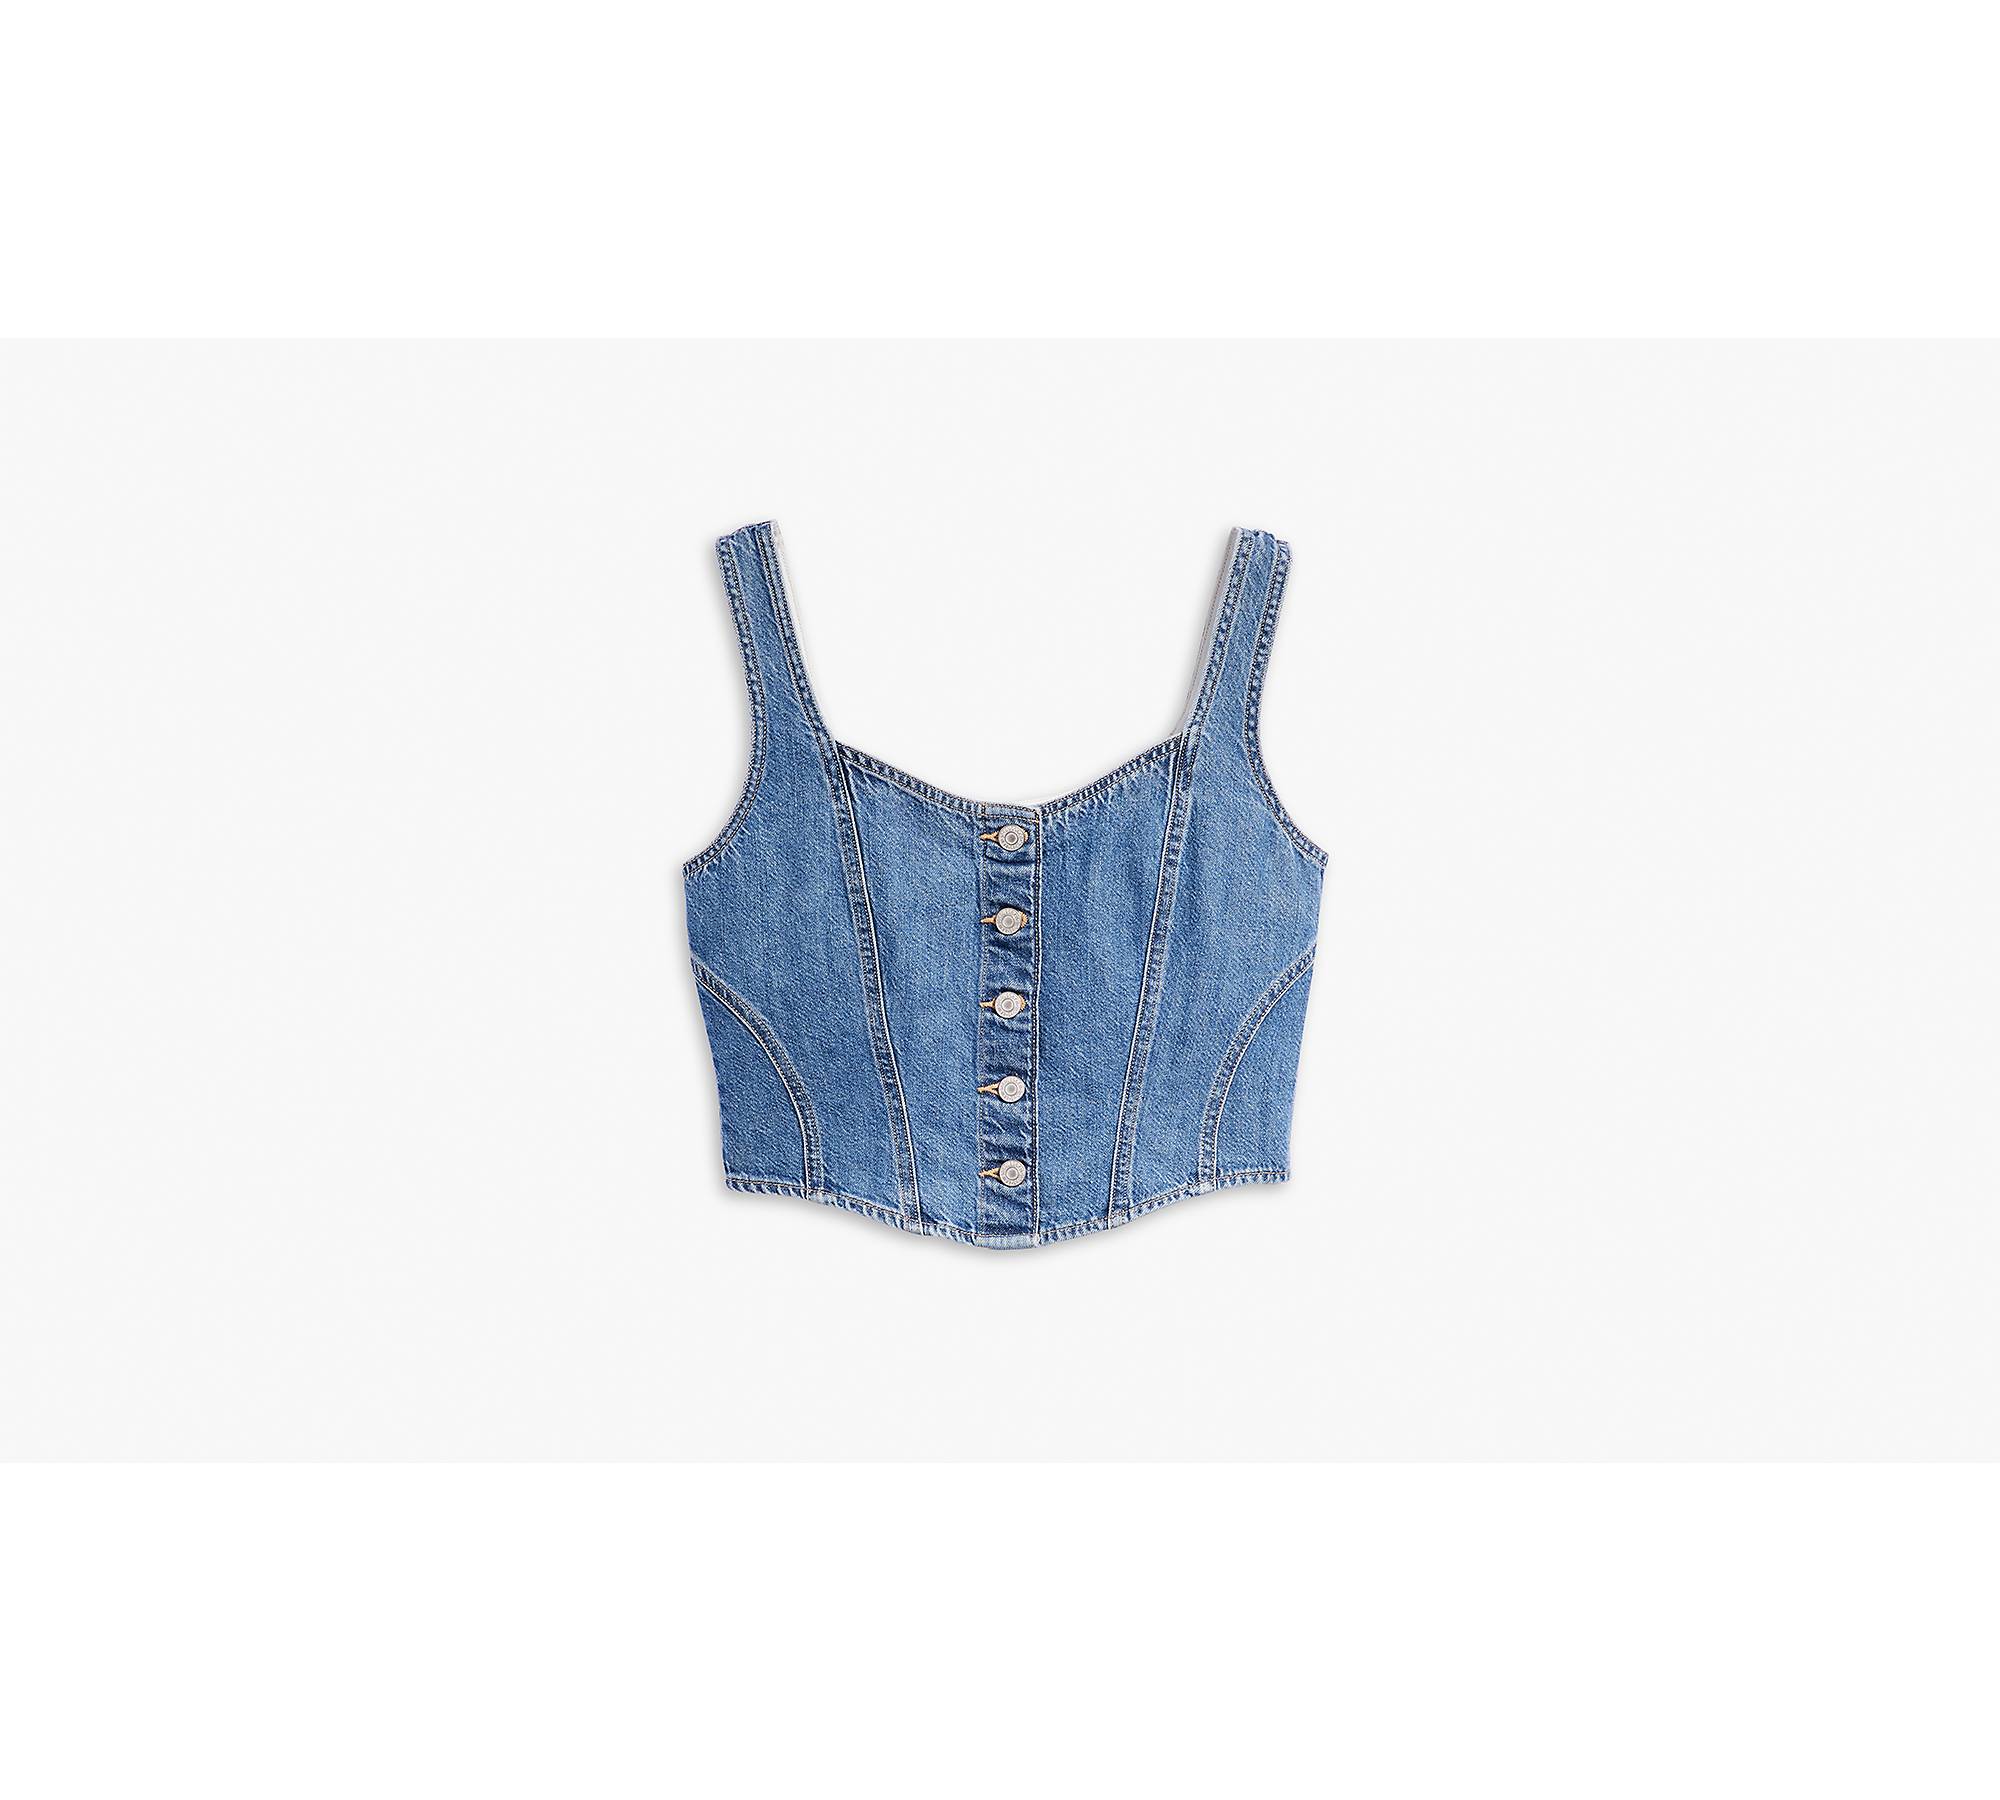 3 ways to style a denim corset top